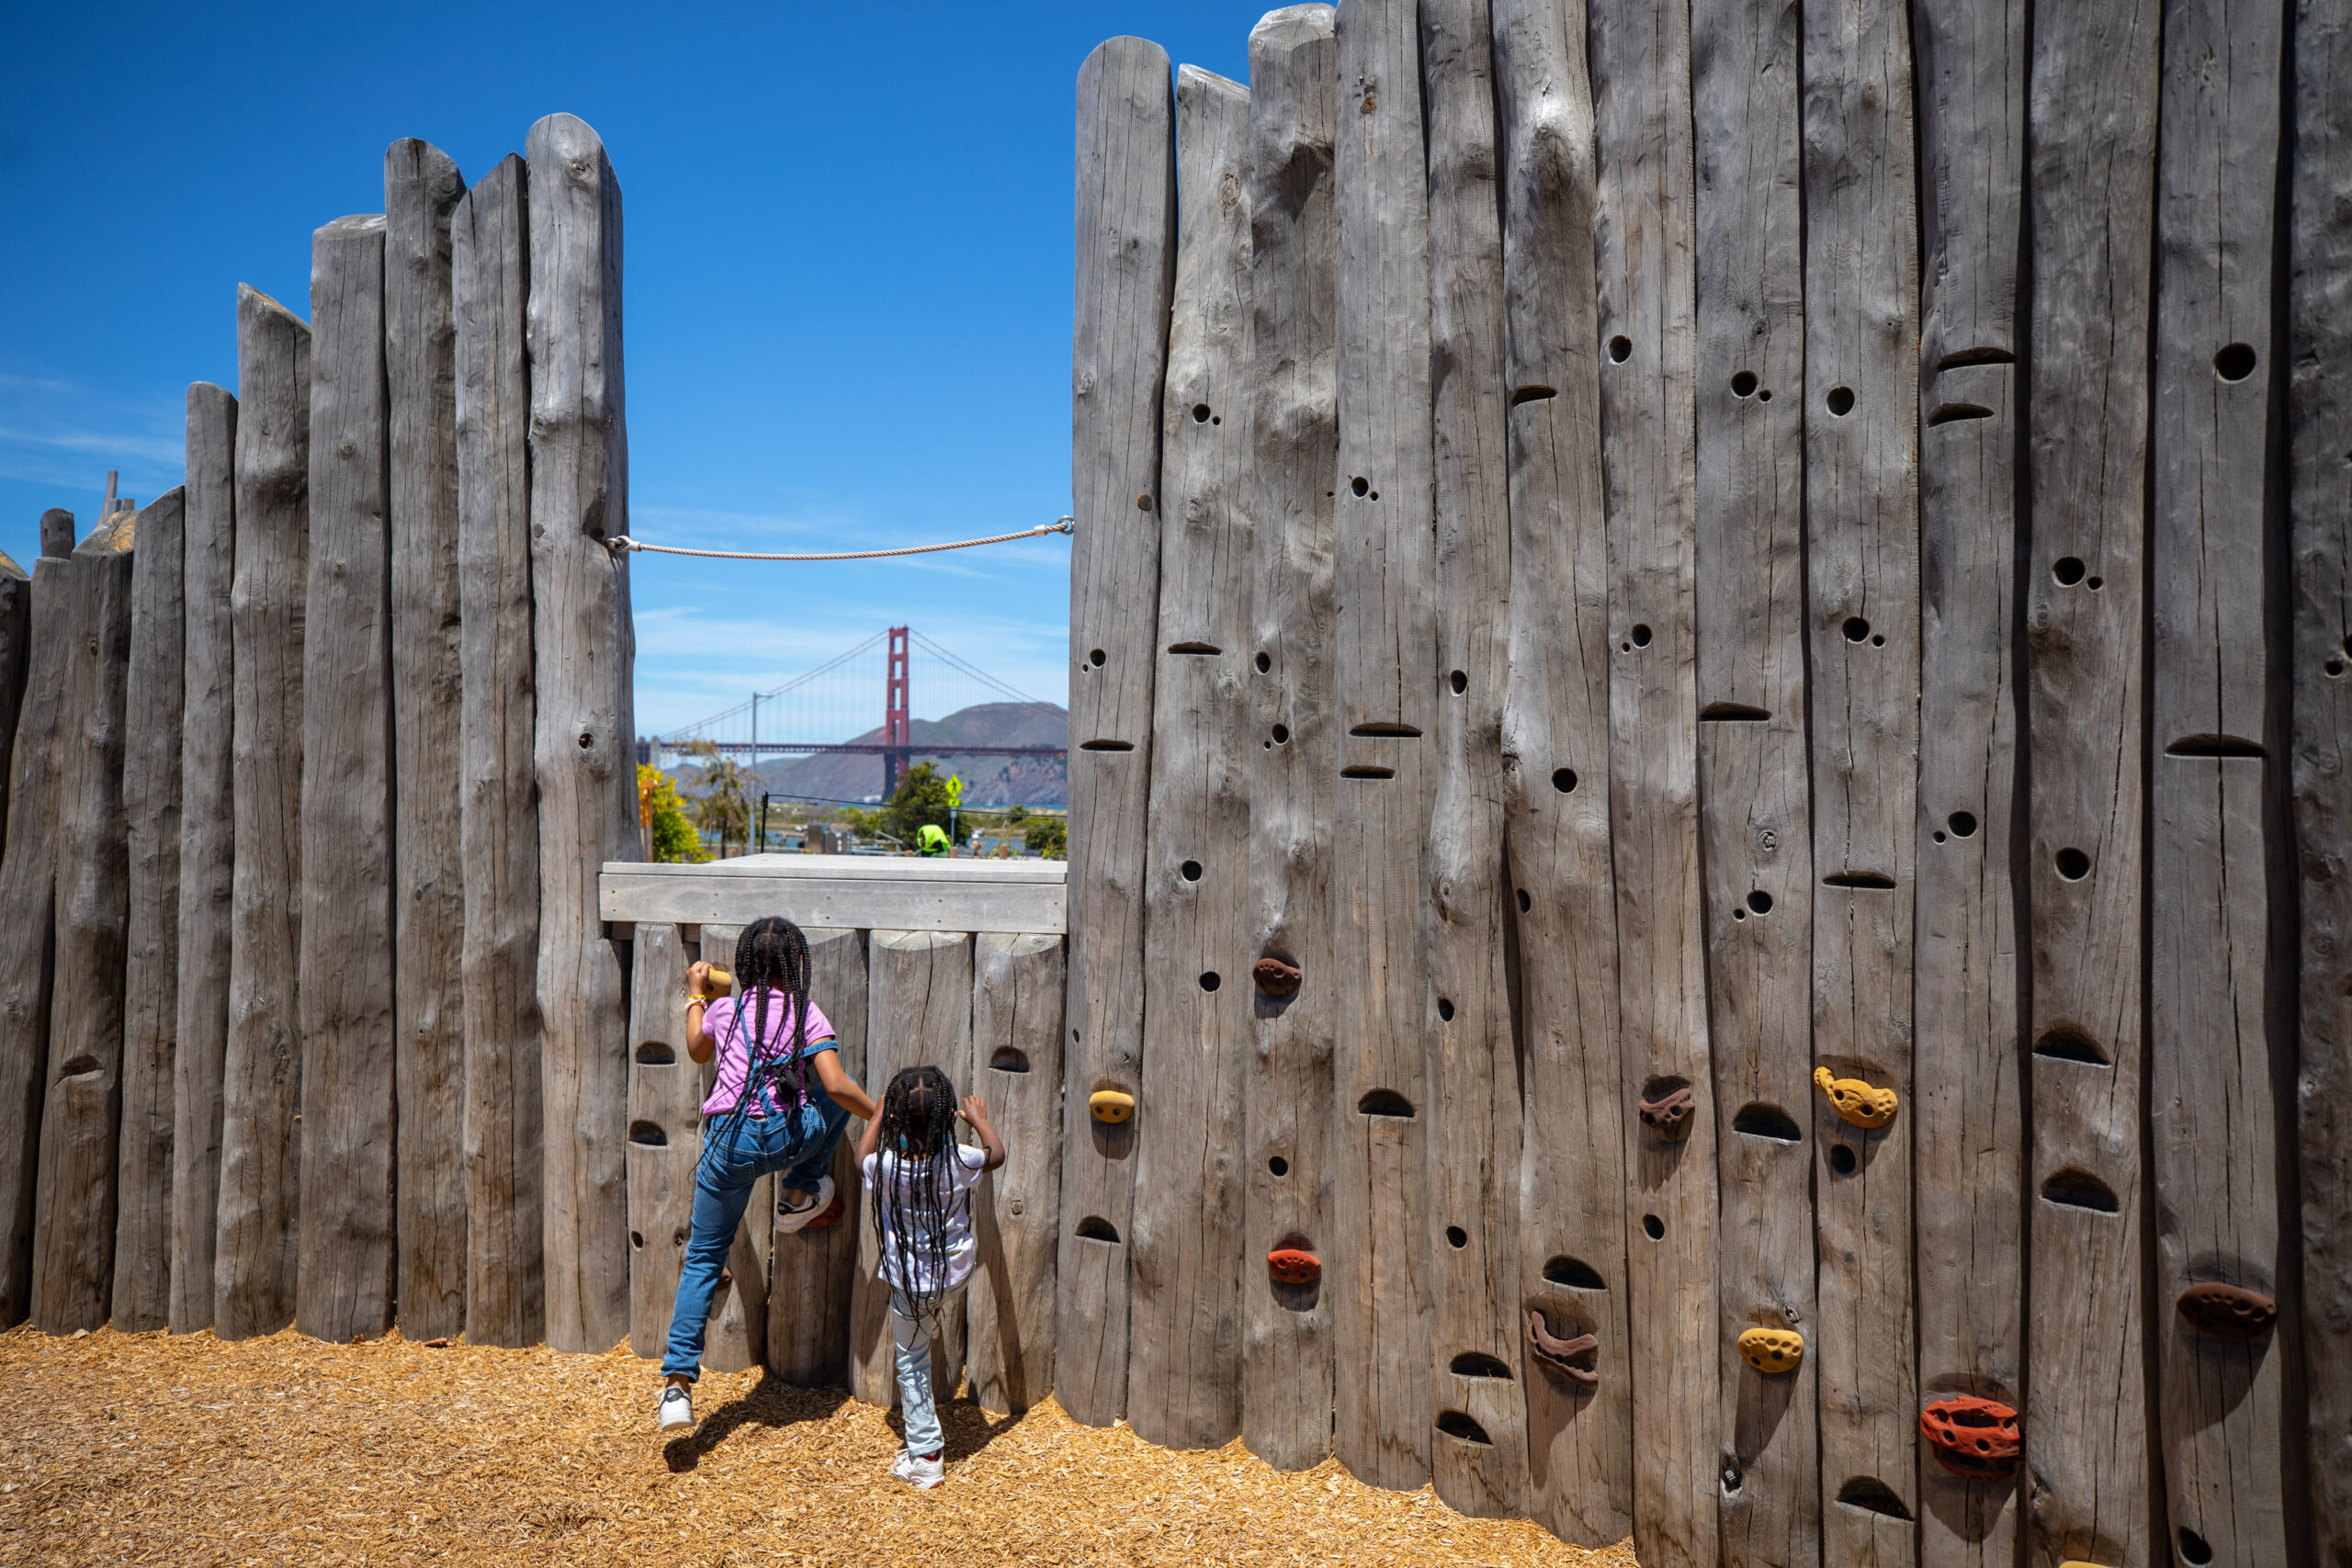 Get a sneak peek of Tunnel Tops, the Presidio’s incredible new park, before it opens in July